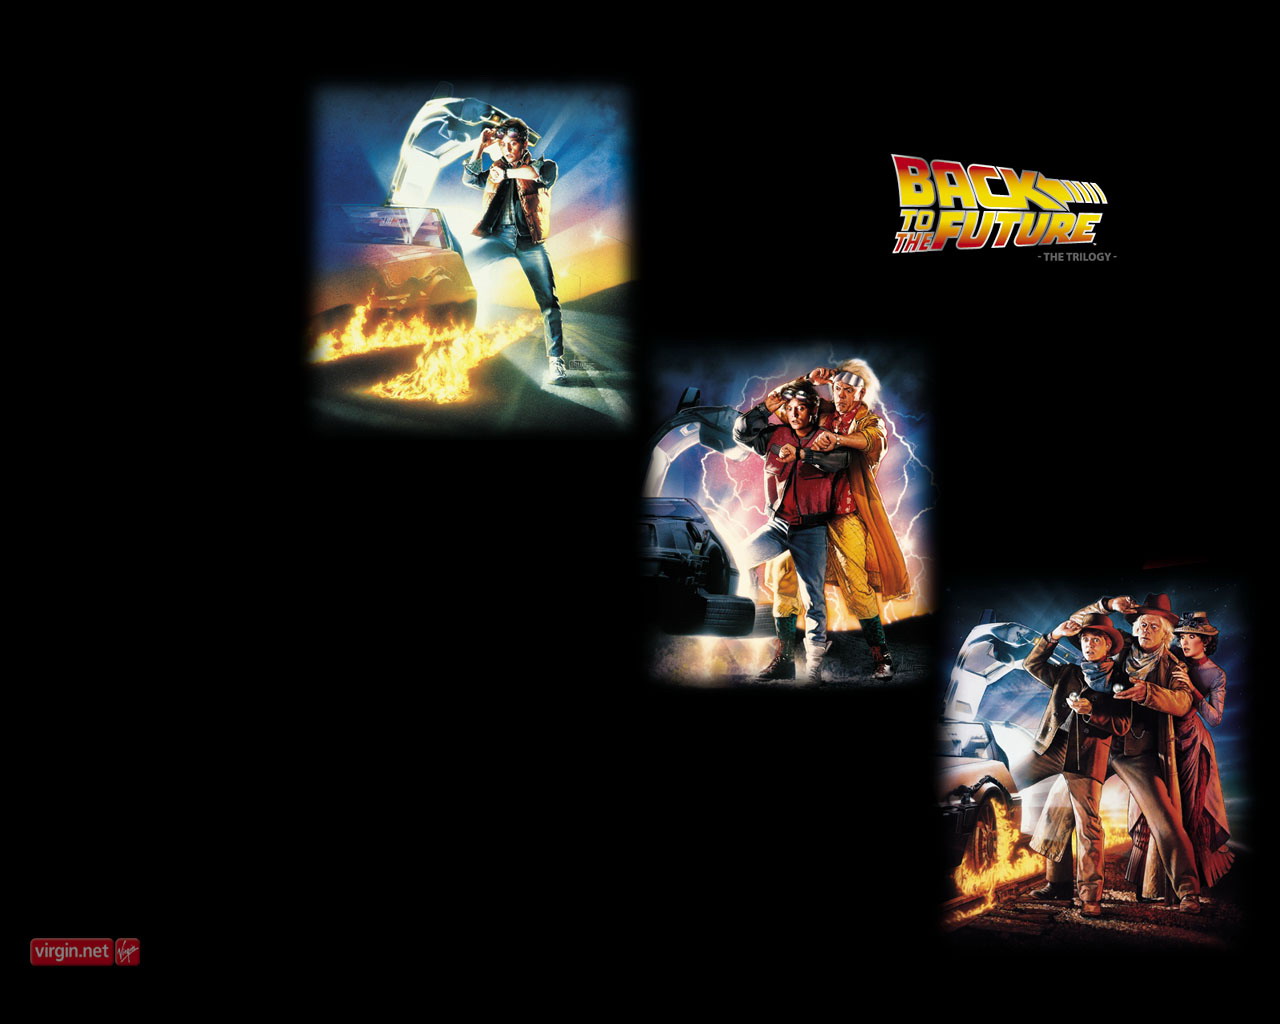 Previous, Movies - Films B - Back to the Future wallpaper